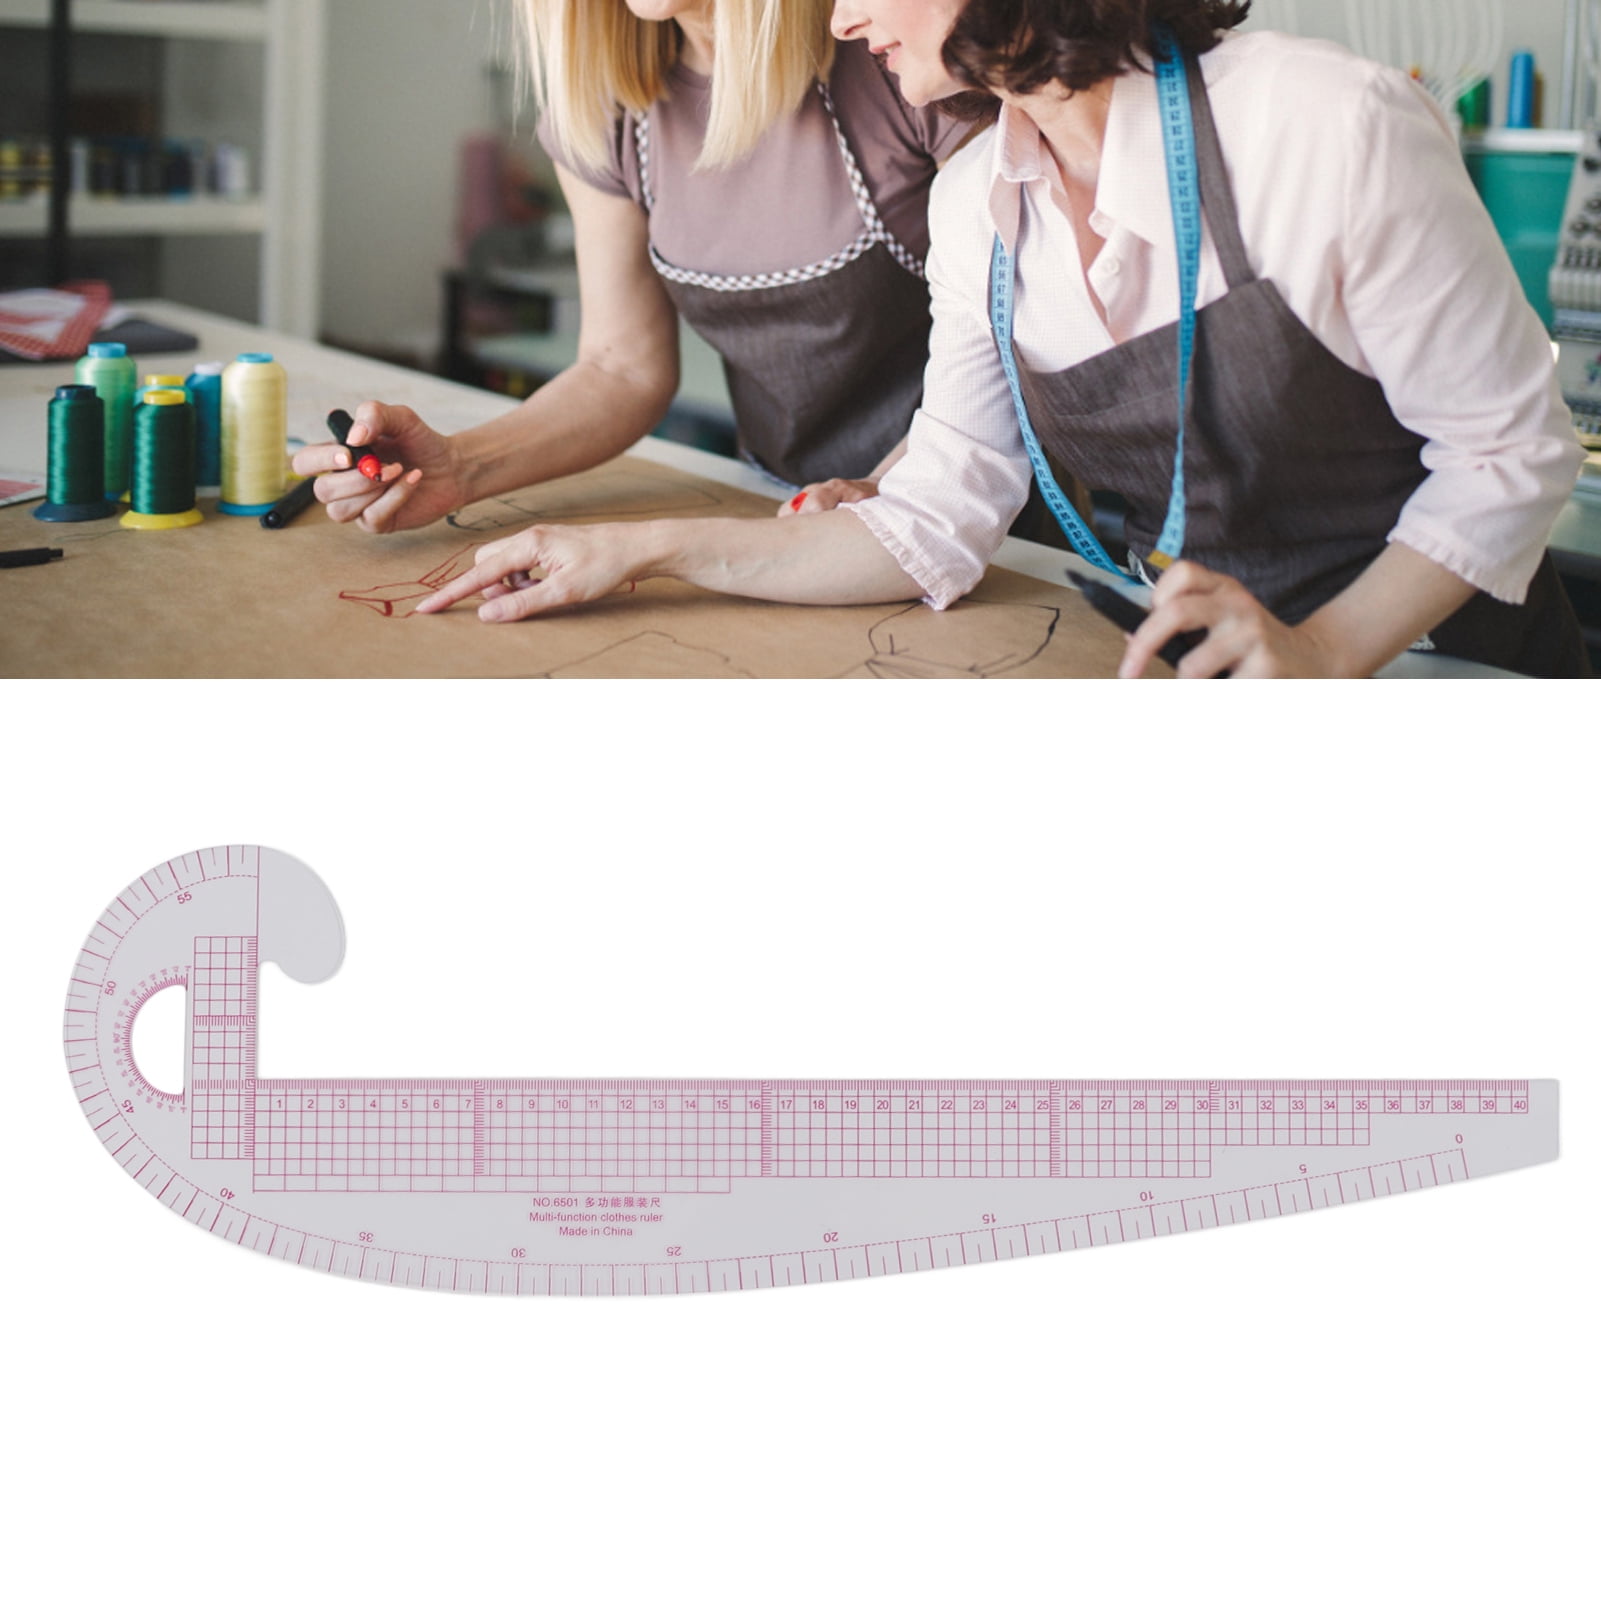 2021 New Arrival Multifunction 6501 Plastic French Curve Sewing Ruler  Measure Tailor Ruler Making Clothing 360 Degree Bend Ruler Tools  transparent 